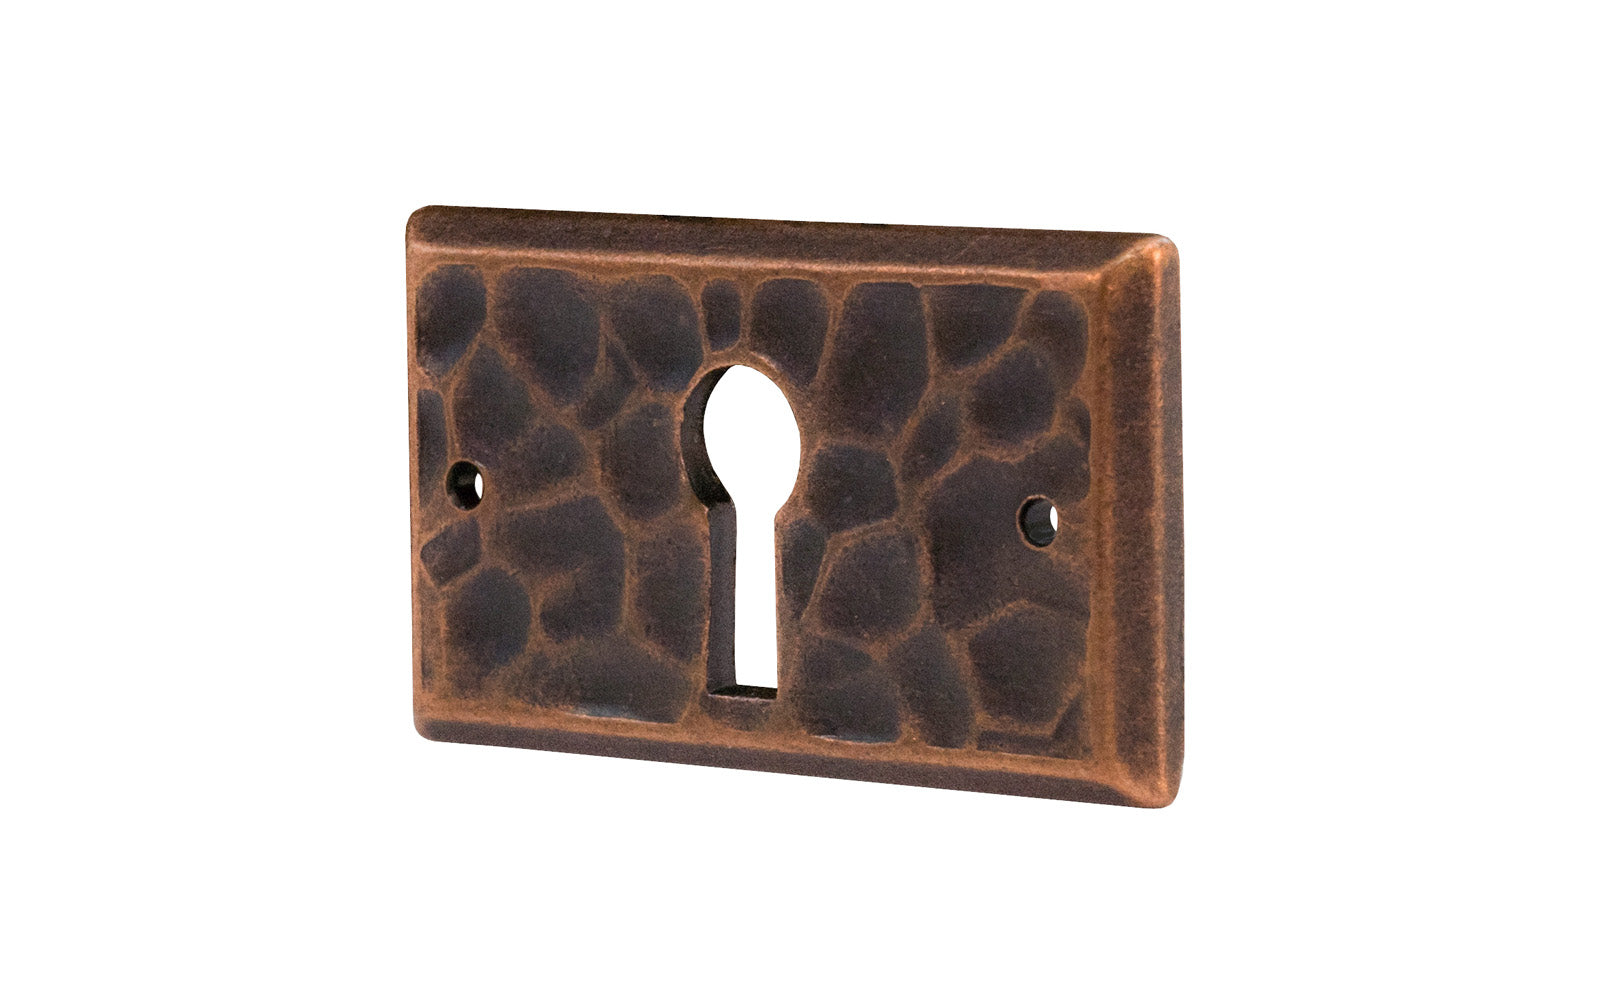 Vintage-style Hardware · Solid Brass Hammered Rectangle Keyhole. Designed in the Mission or Arts & Crafts style, Gustav Stickley style hardware. Rustic hammered keyhole in an Antique copper finish. Thick keyhole plate. 1